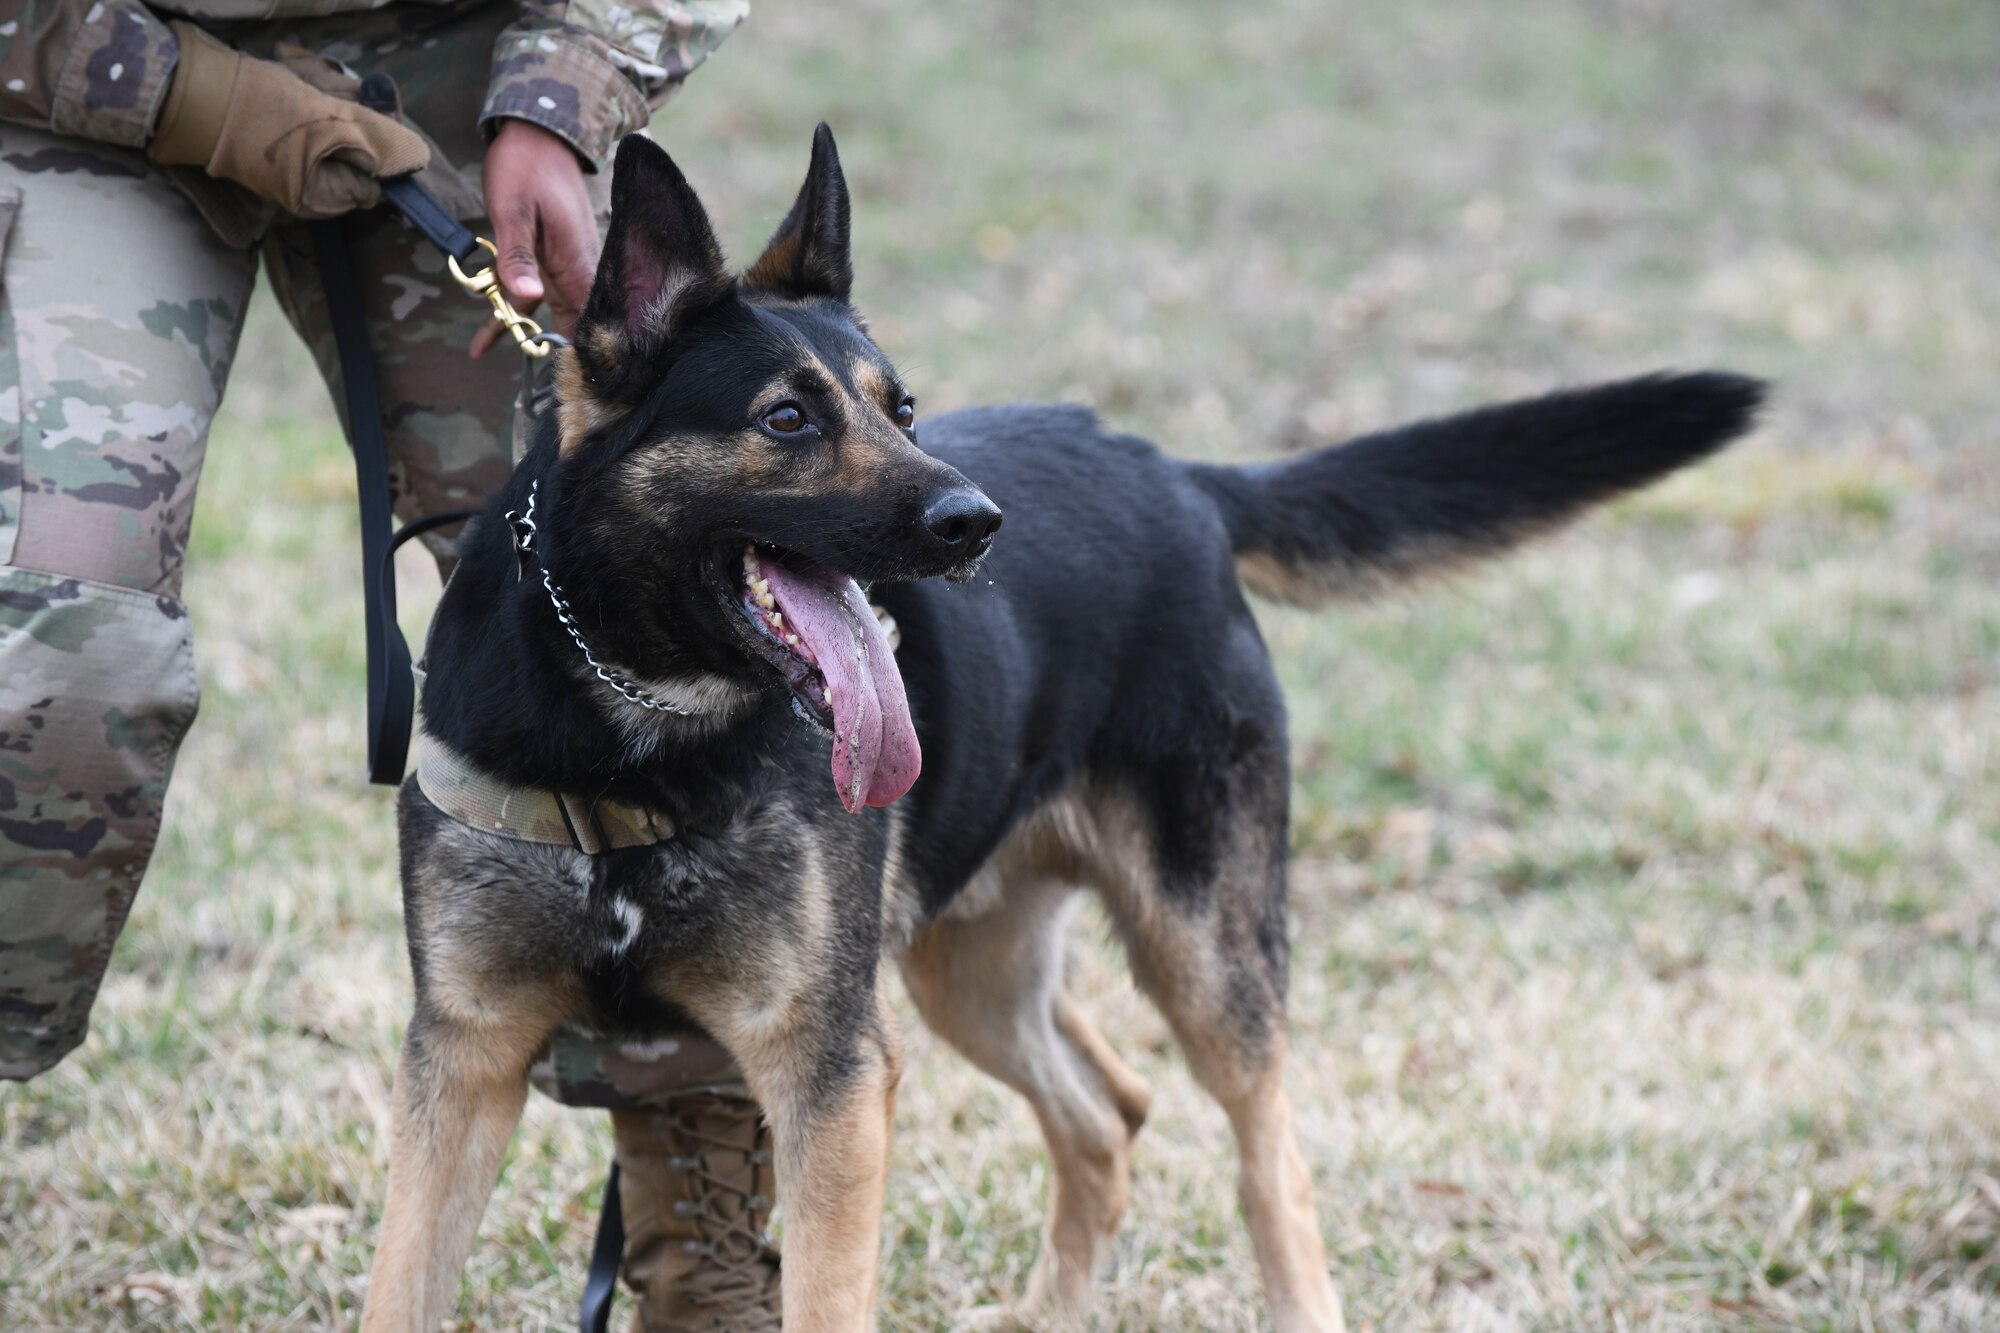 A german shepard  military working dog looks onward with his tongue hanging out as his handler is detaching his collar during a bite demonstration.